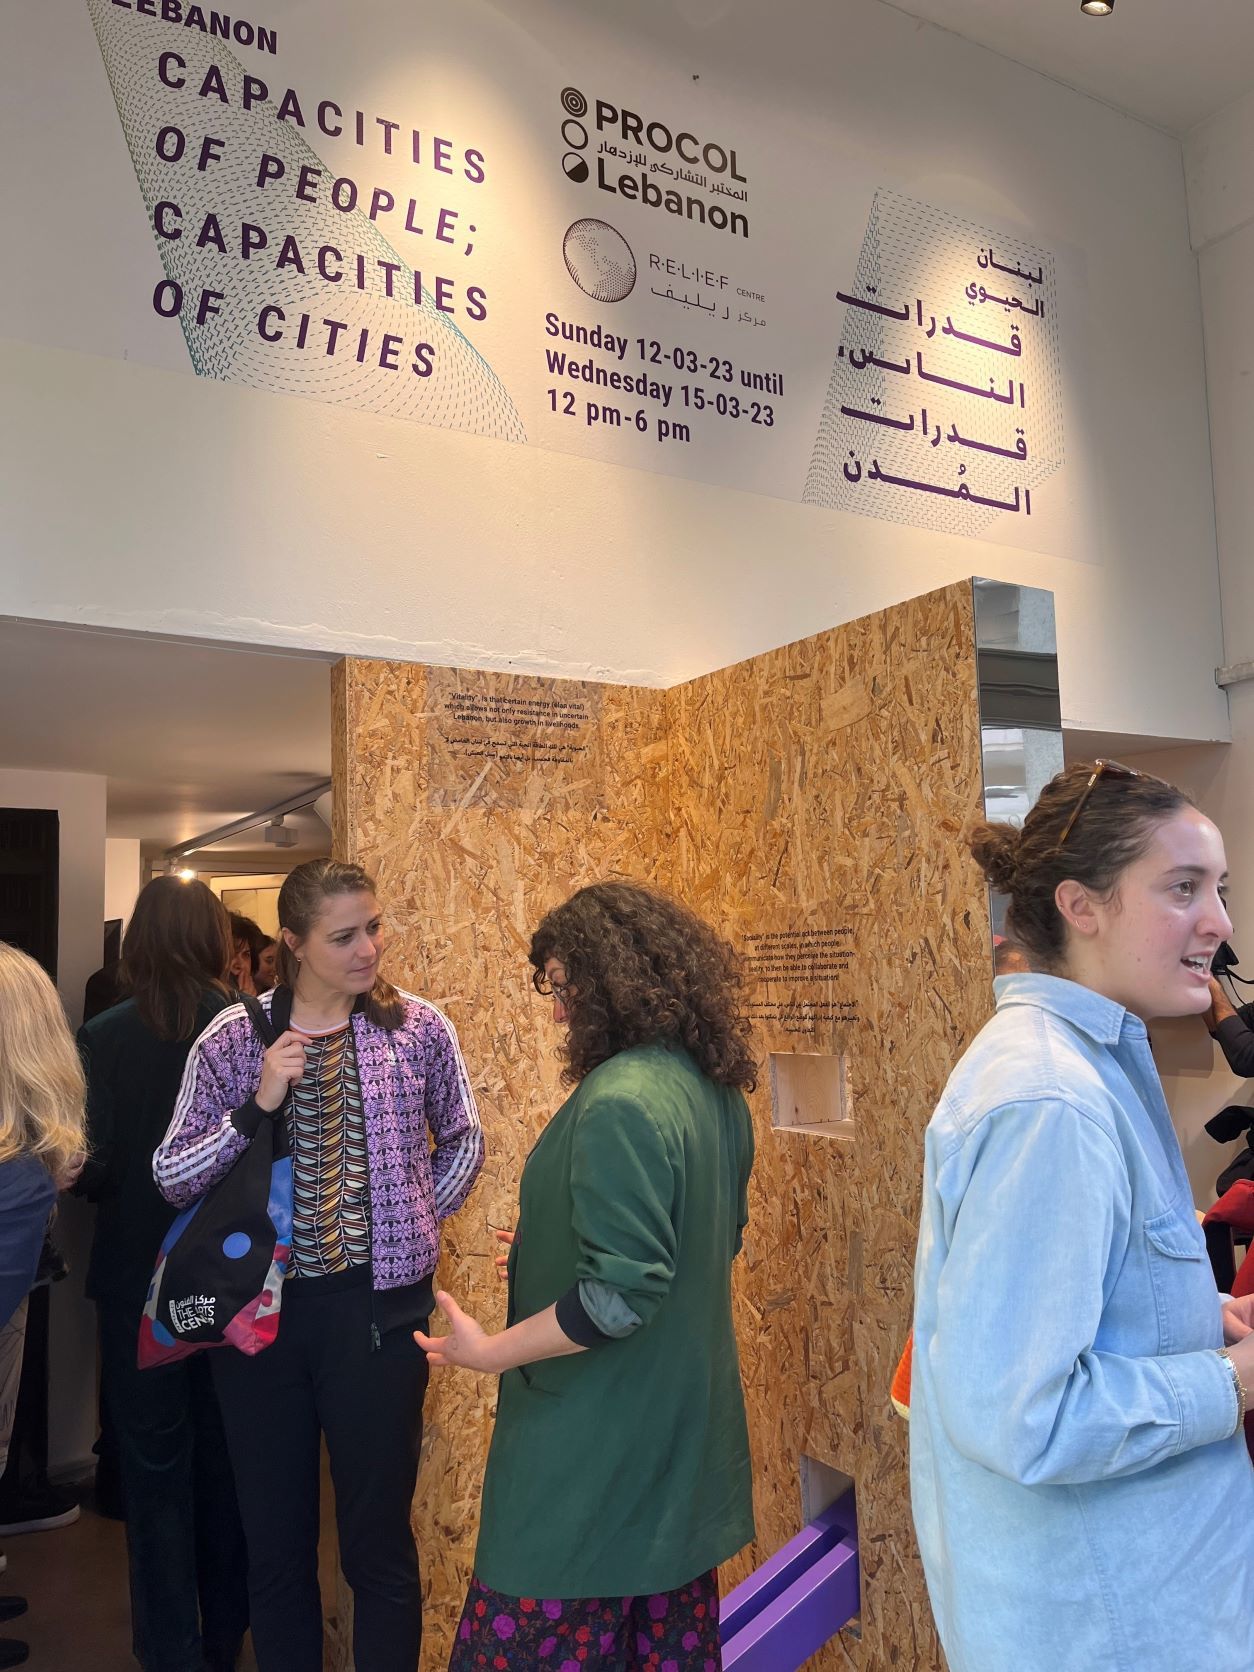 Visitors at the exhibition ‘Capacities of people; capacities of cities’.